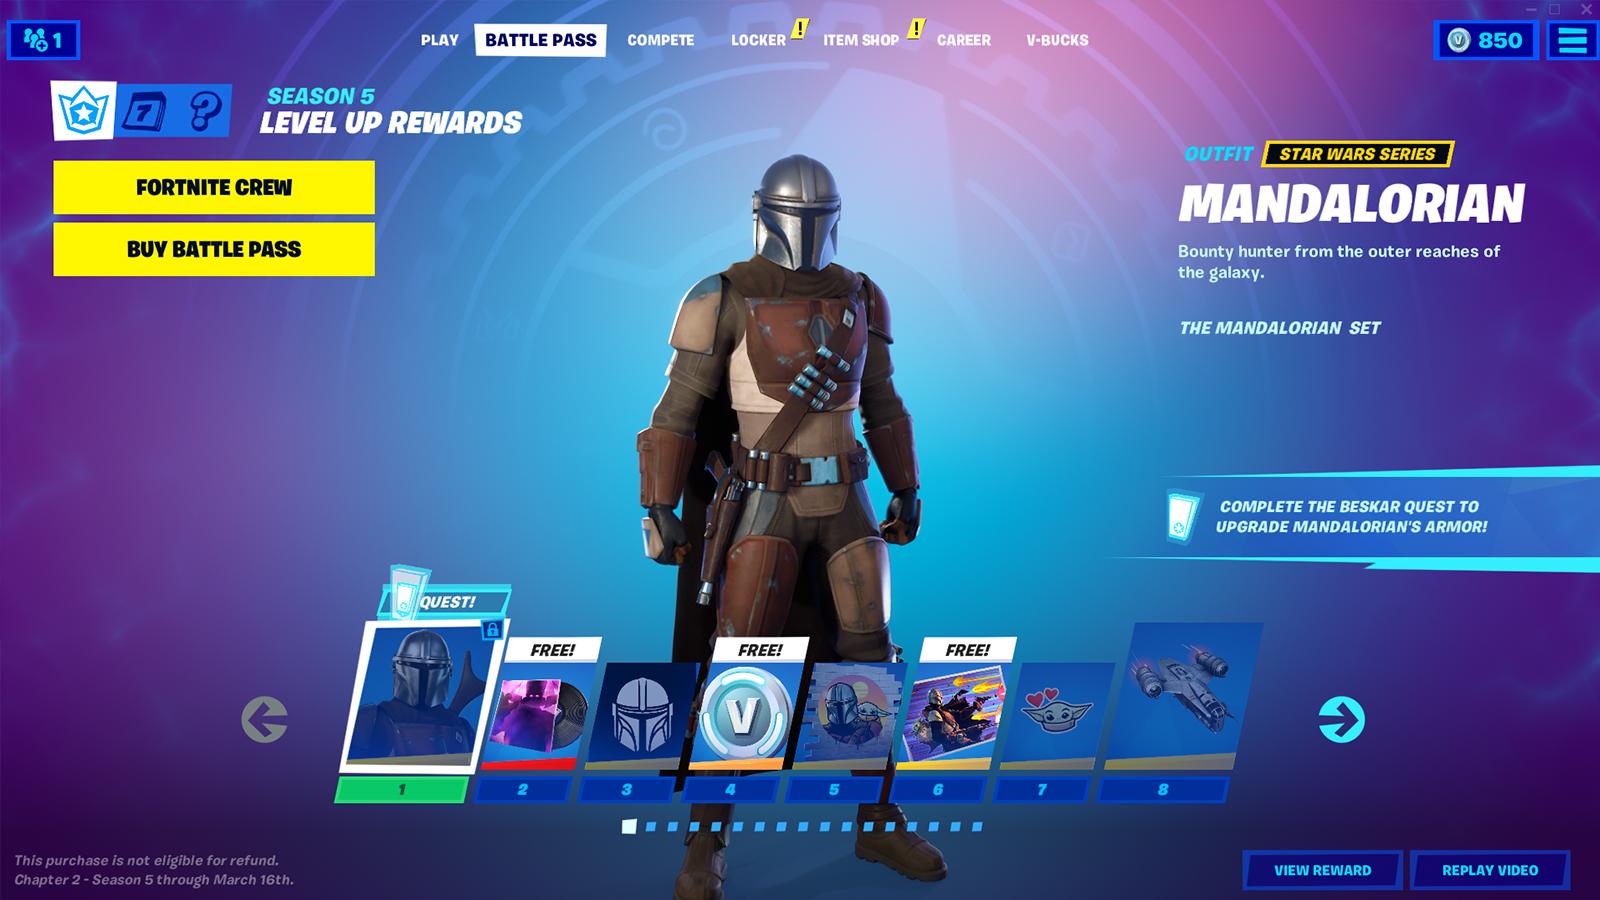 Fortnite's Battle Pass in the new Chapter 2, Season 5.